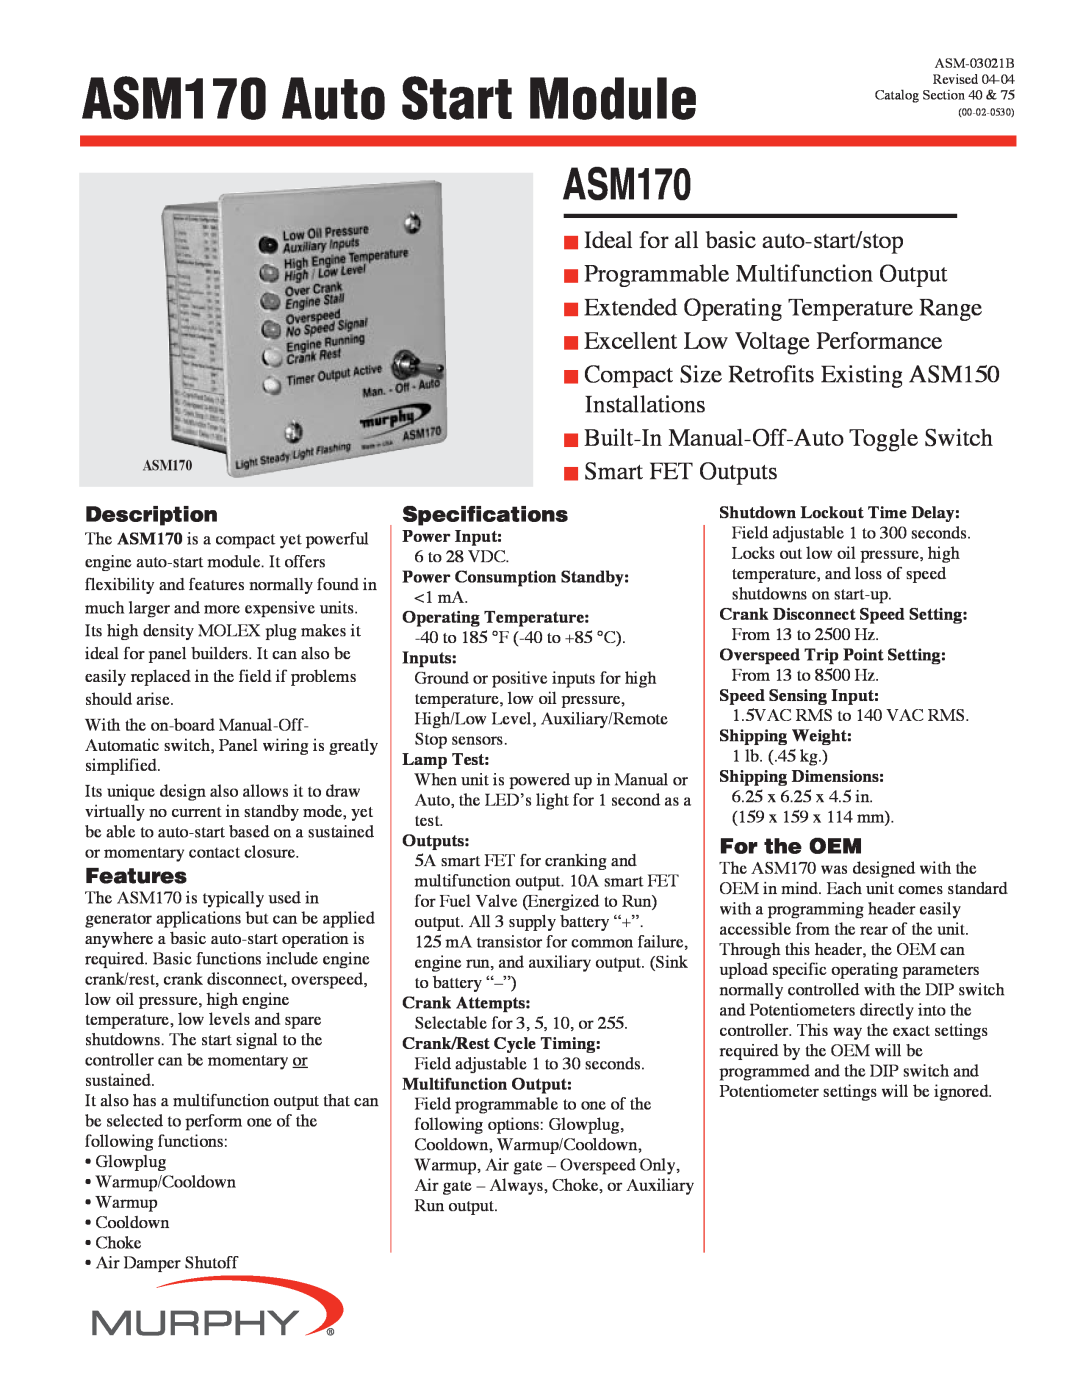 Murphy specifications Description, Features, Specifications, For the OEM, ASM170 Auto Start Module 